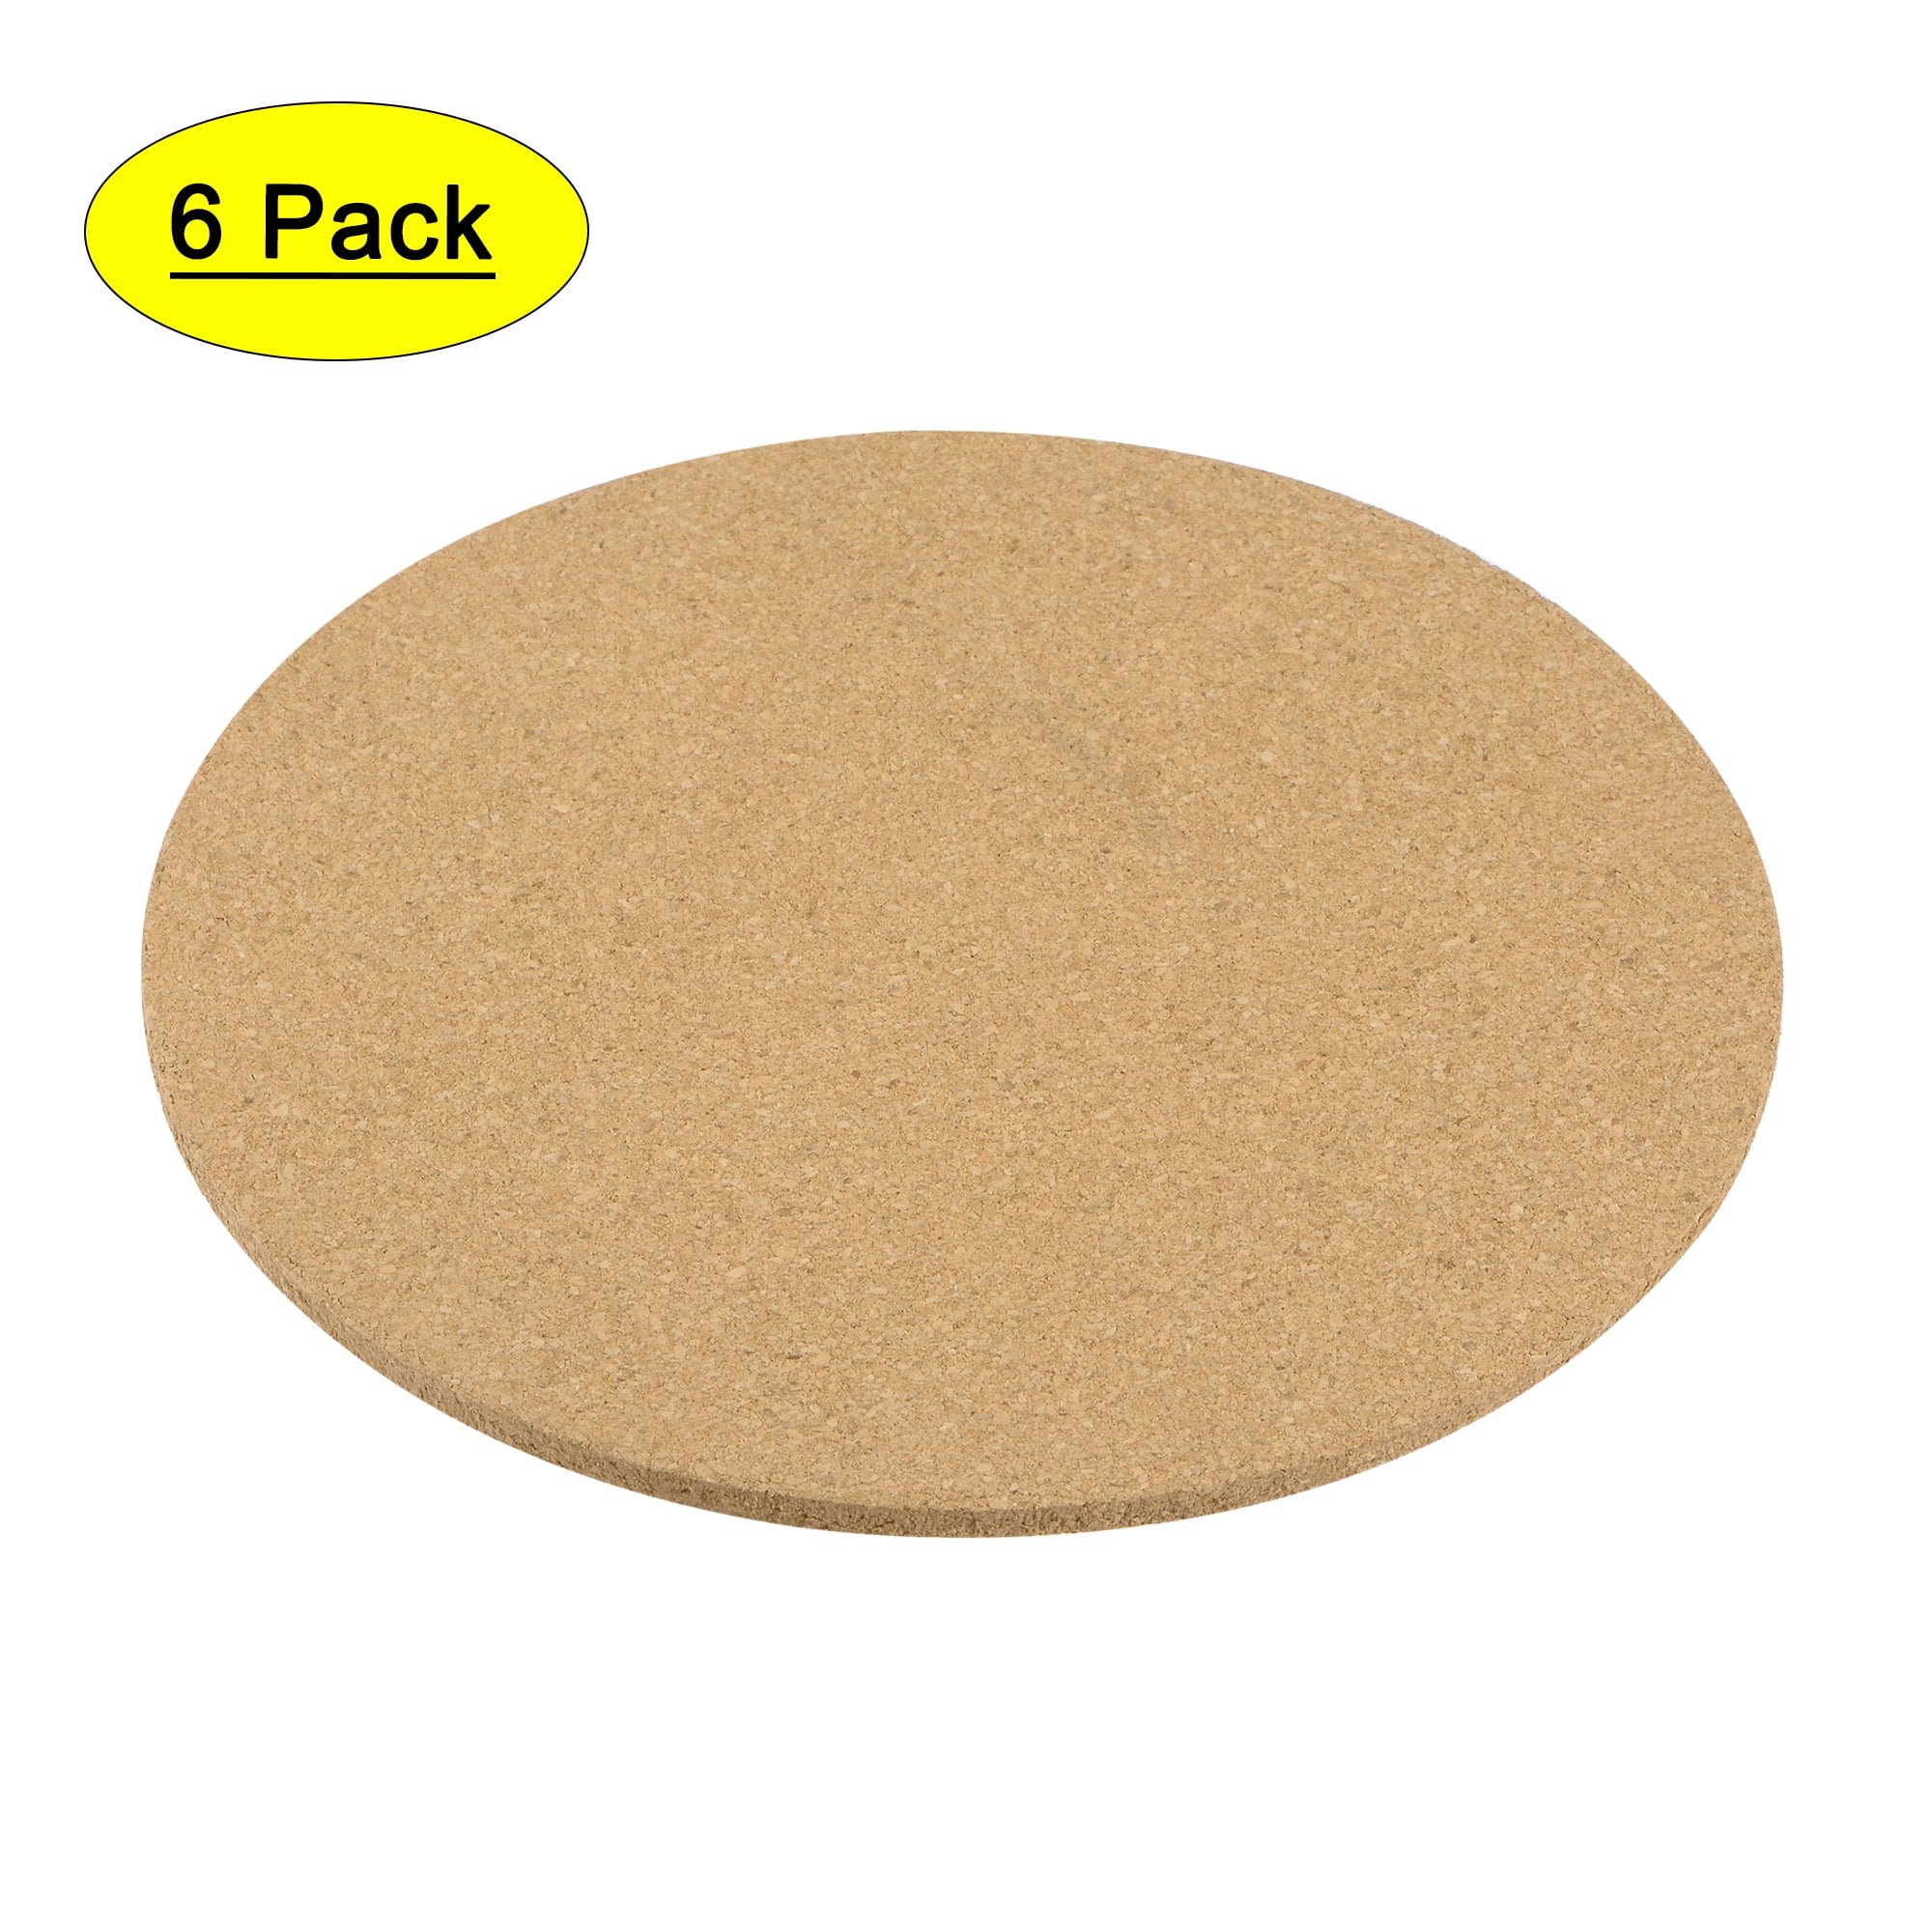 6 Inch, Set of 2 – Oversized cork absorbent drink coasters XL Coasters Gone Fishing 